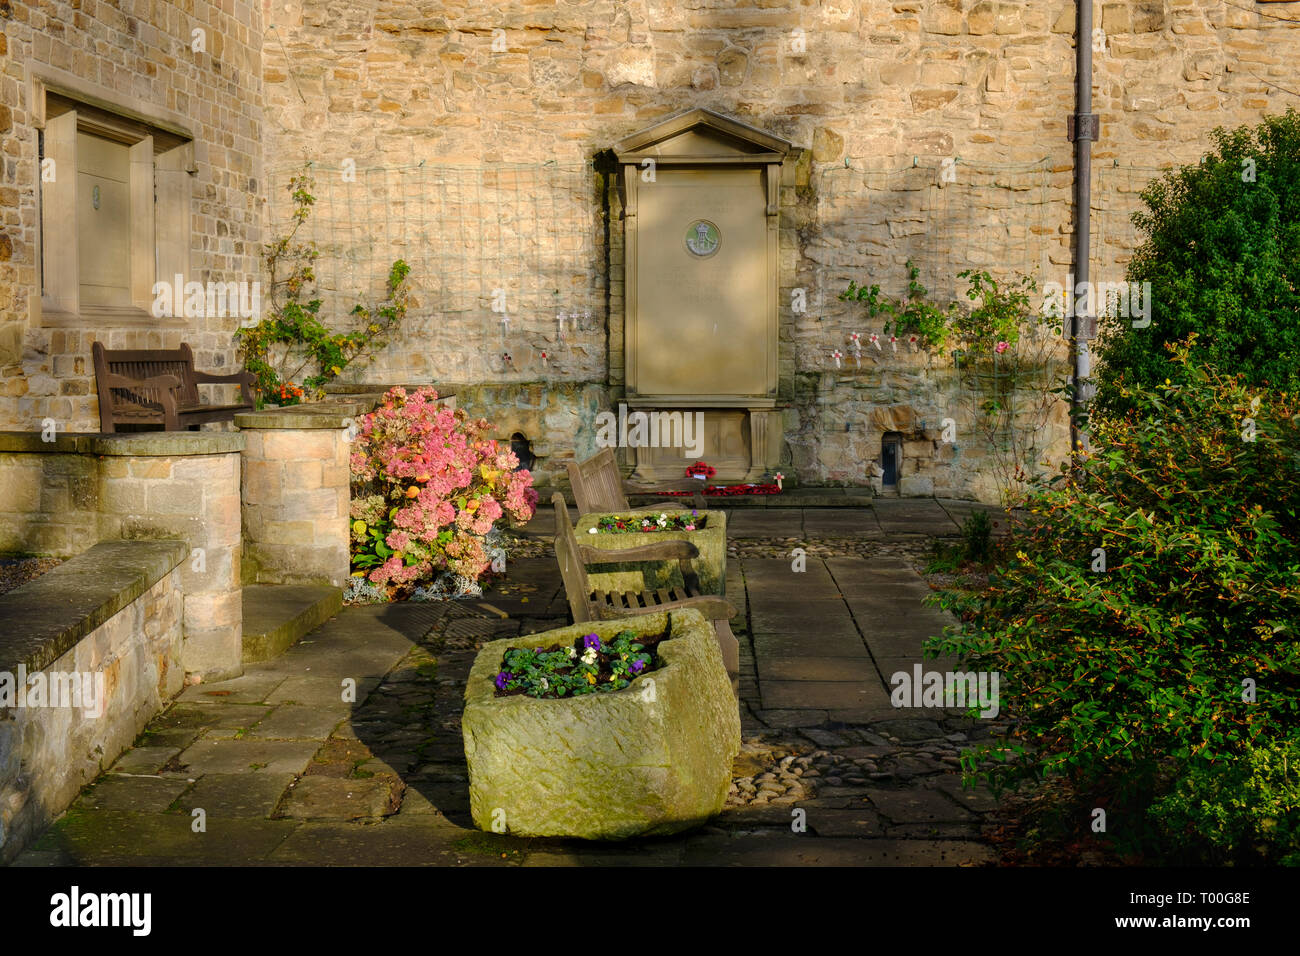 DLI - Durham Light Infantry Army Regiment Memorial Garden in the cathedral grounds, Durham England Stock Photo